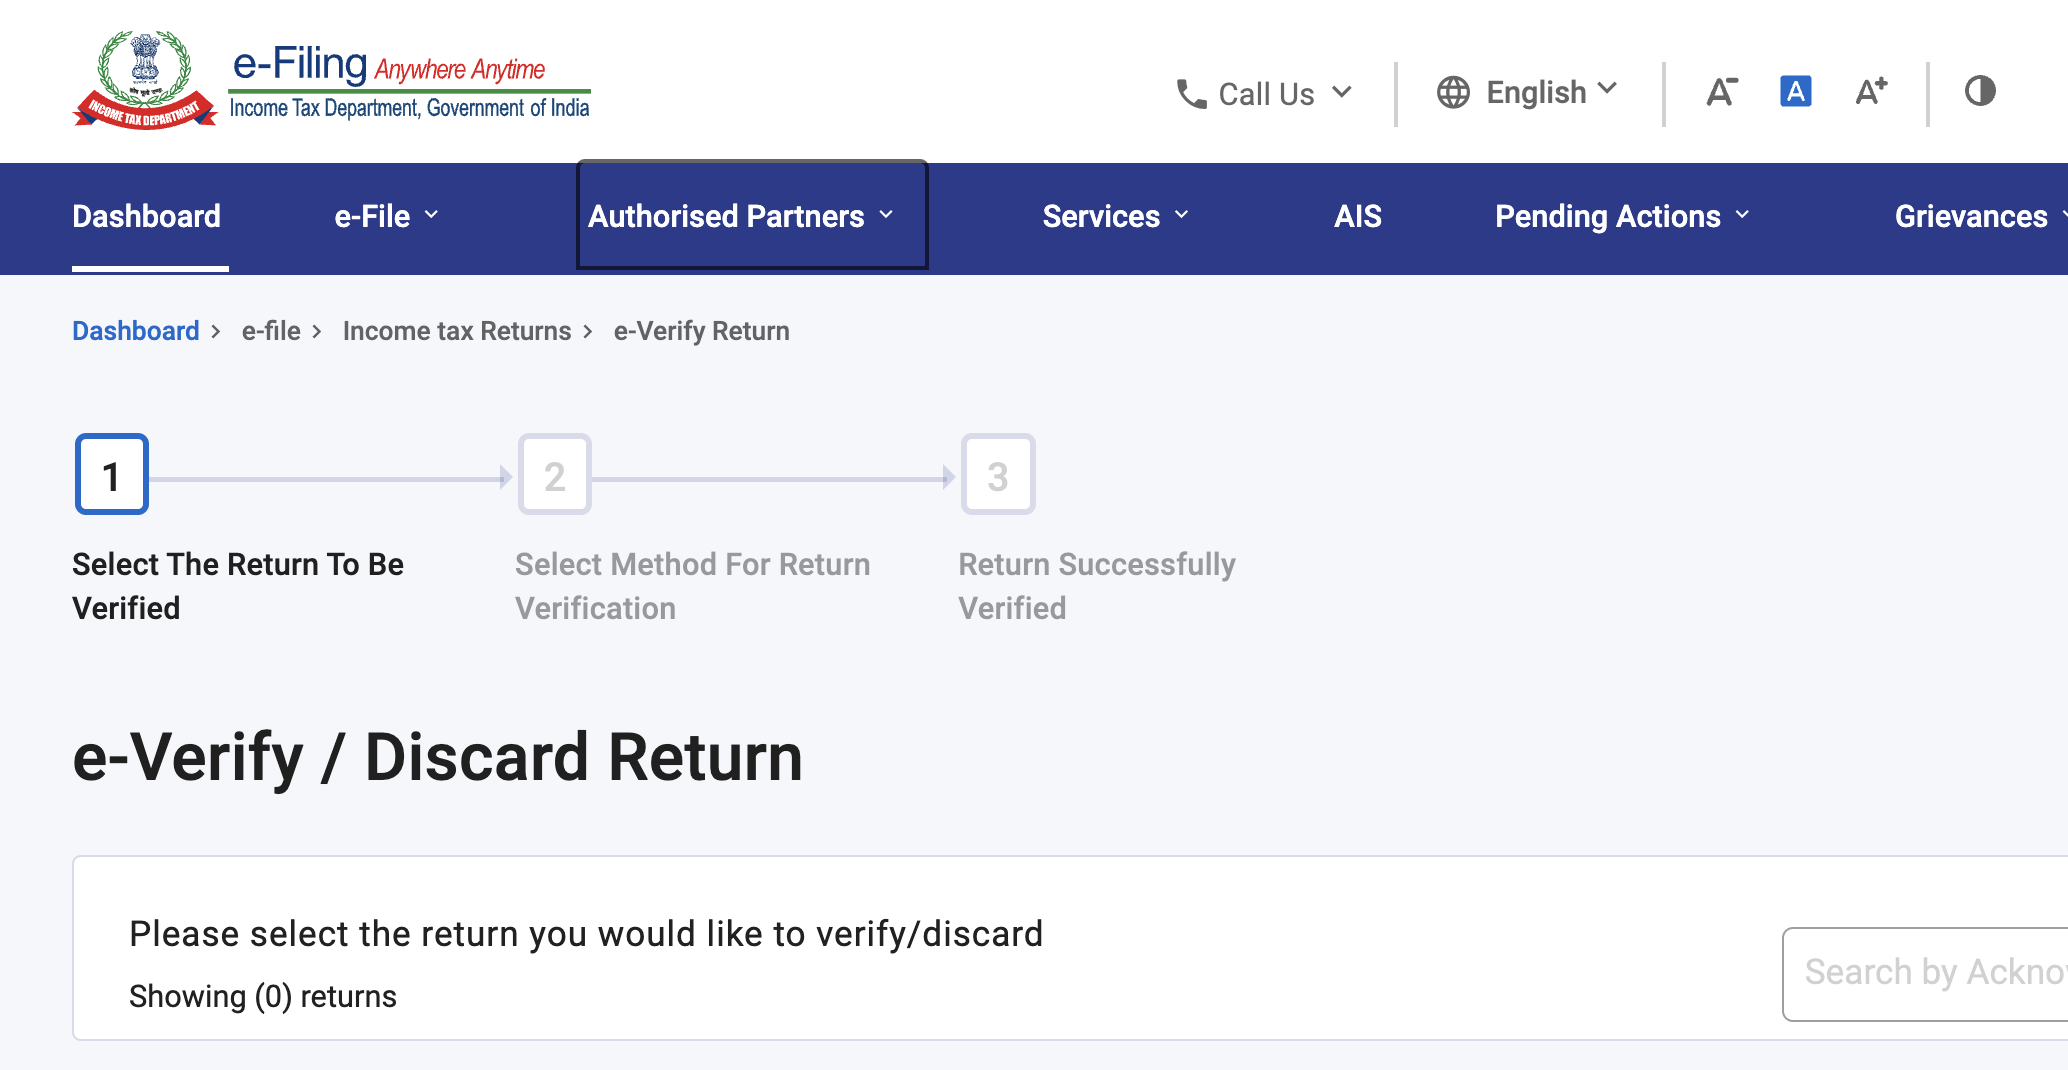 Income tax department introduces new ‘Discard ITR’ facility on its website from AY24. Here are the details